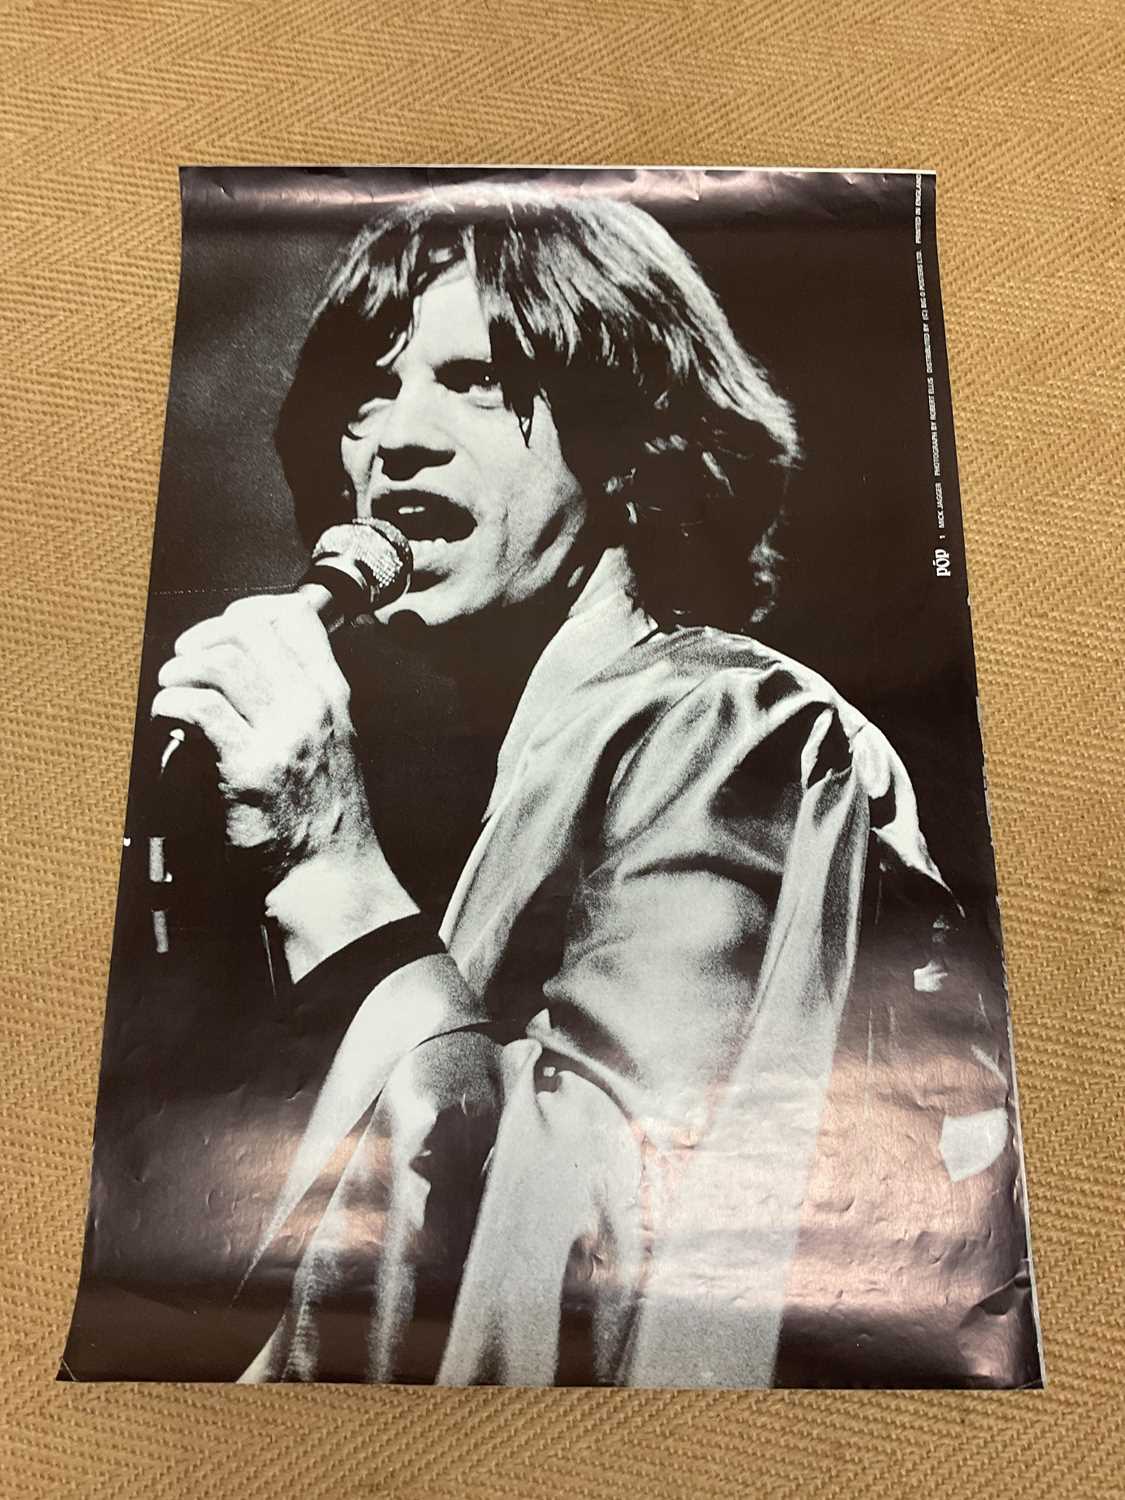 MICK JAGGER; three original black and white posters of The Rolling Stones singer, published by Big O - Image 3 of 6